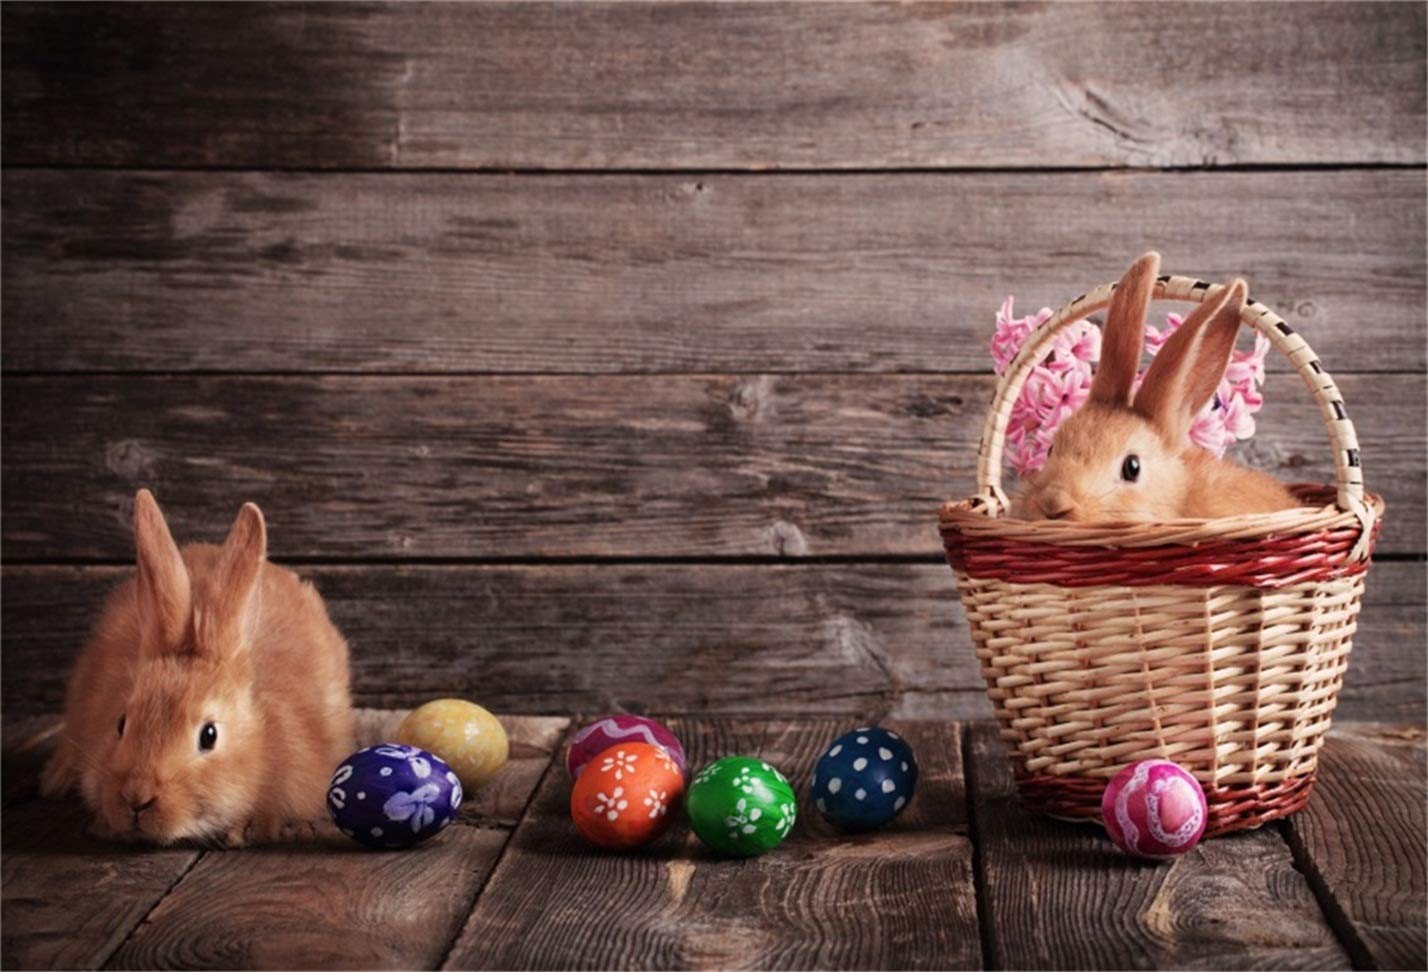 Amazon.com, CSFOTO 6x4ft Background for Rabbit Easter on Rustic